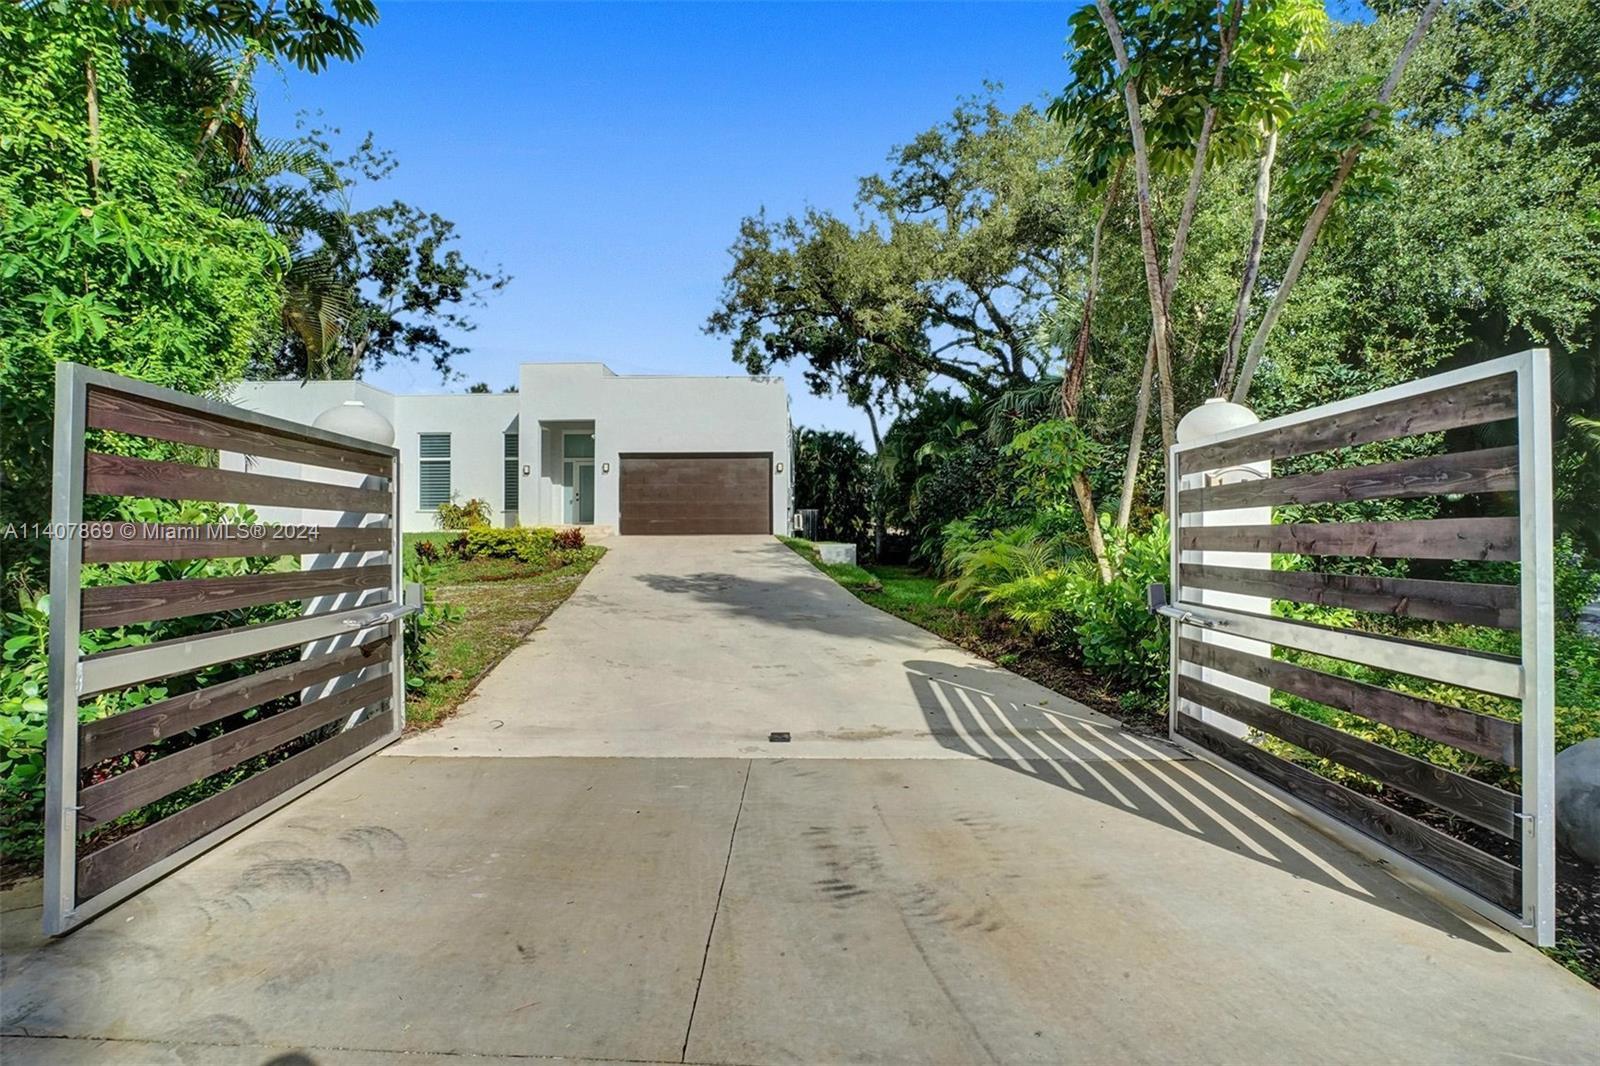 Built in 2021 and recently renovated, this luxurious home offers a perfect blend of elegance and com